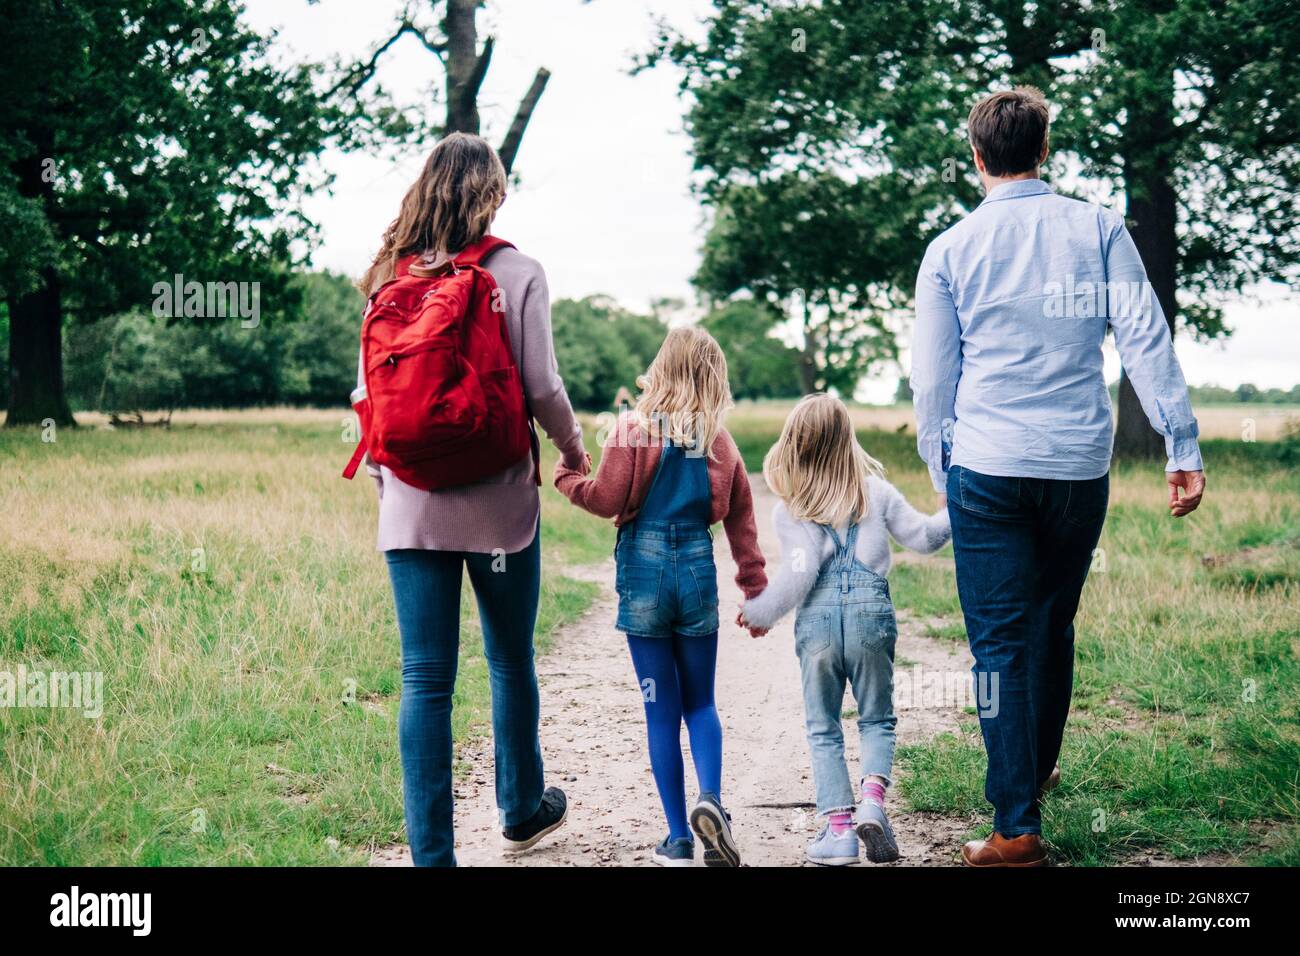 Family holding hands while walking together at park Stock Photo